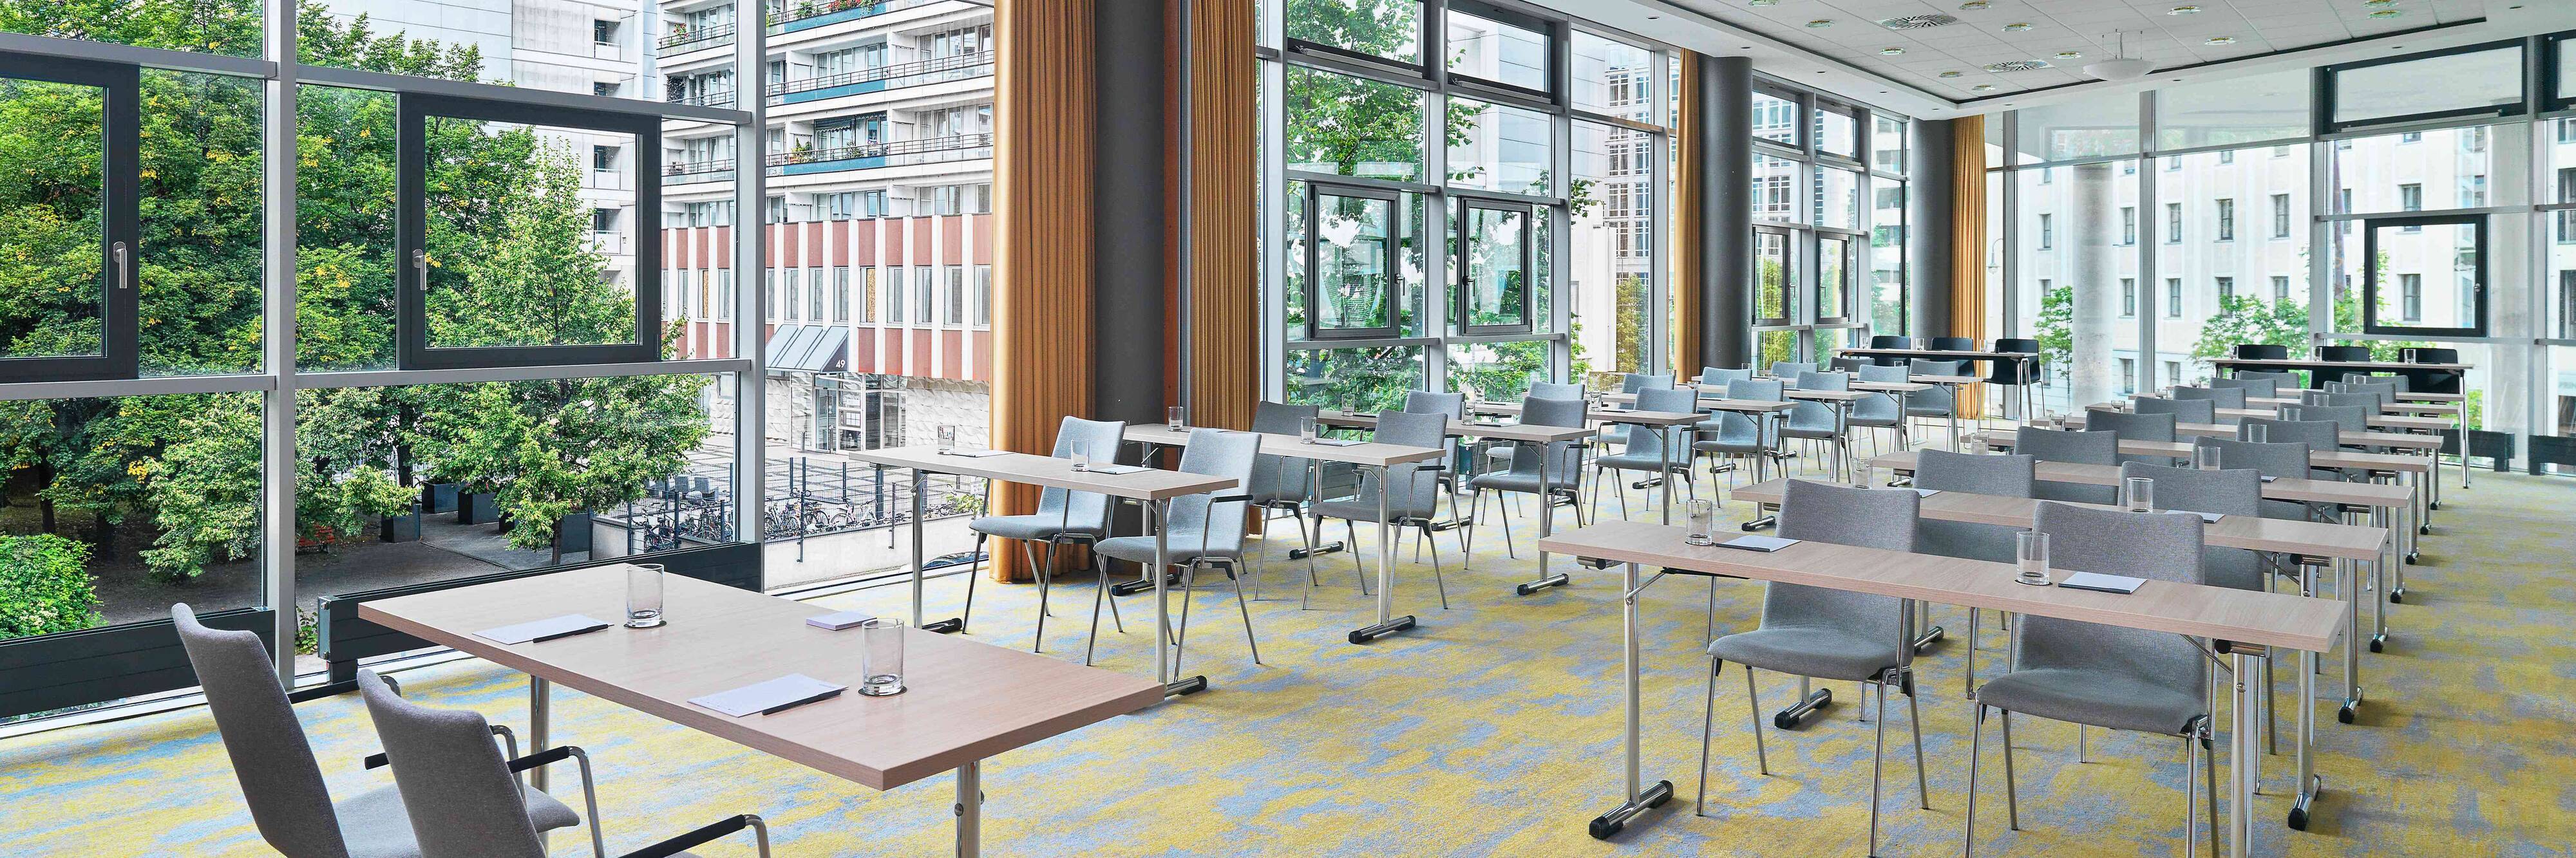 Meeting room with floor to ceiling windows